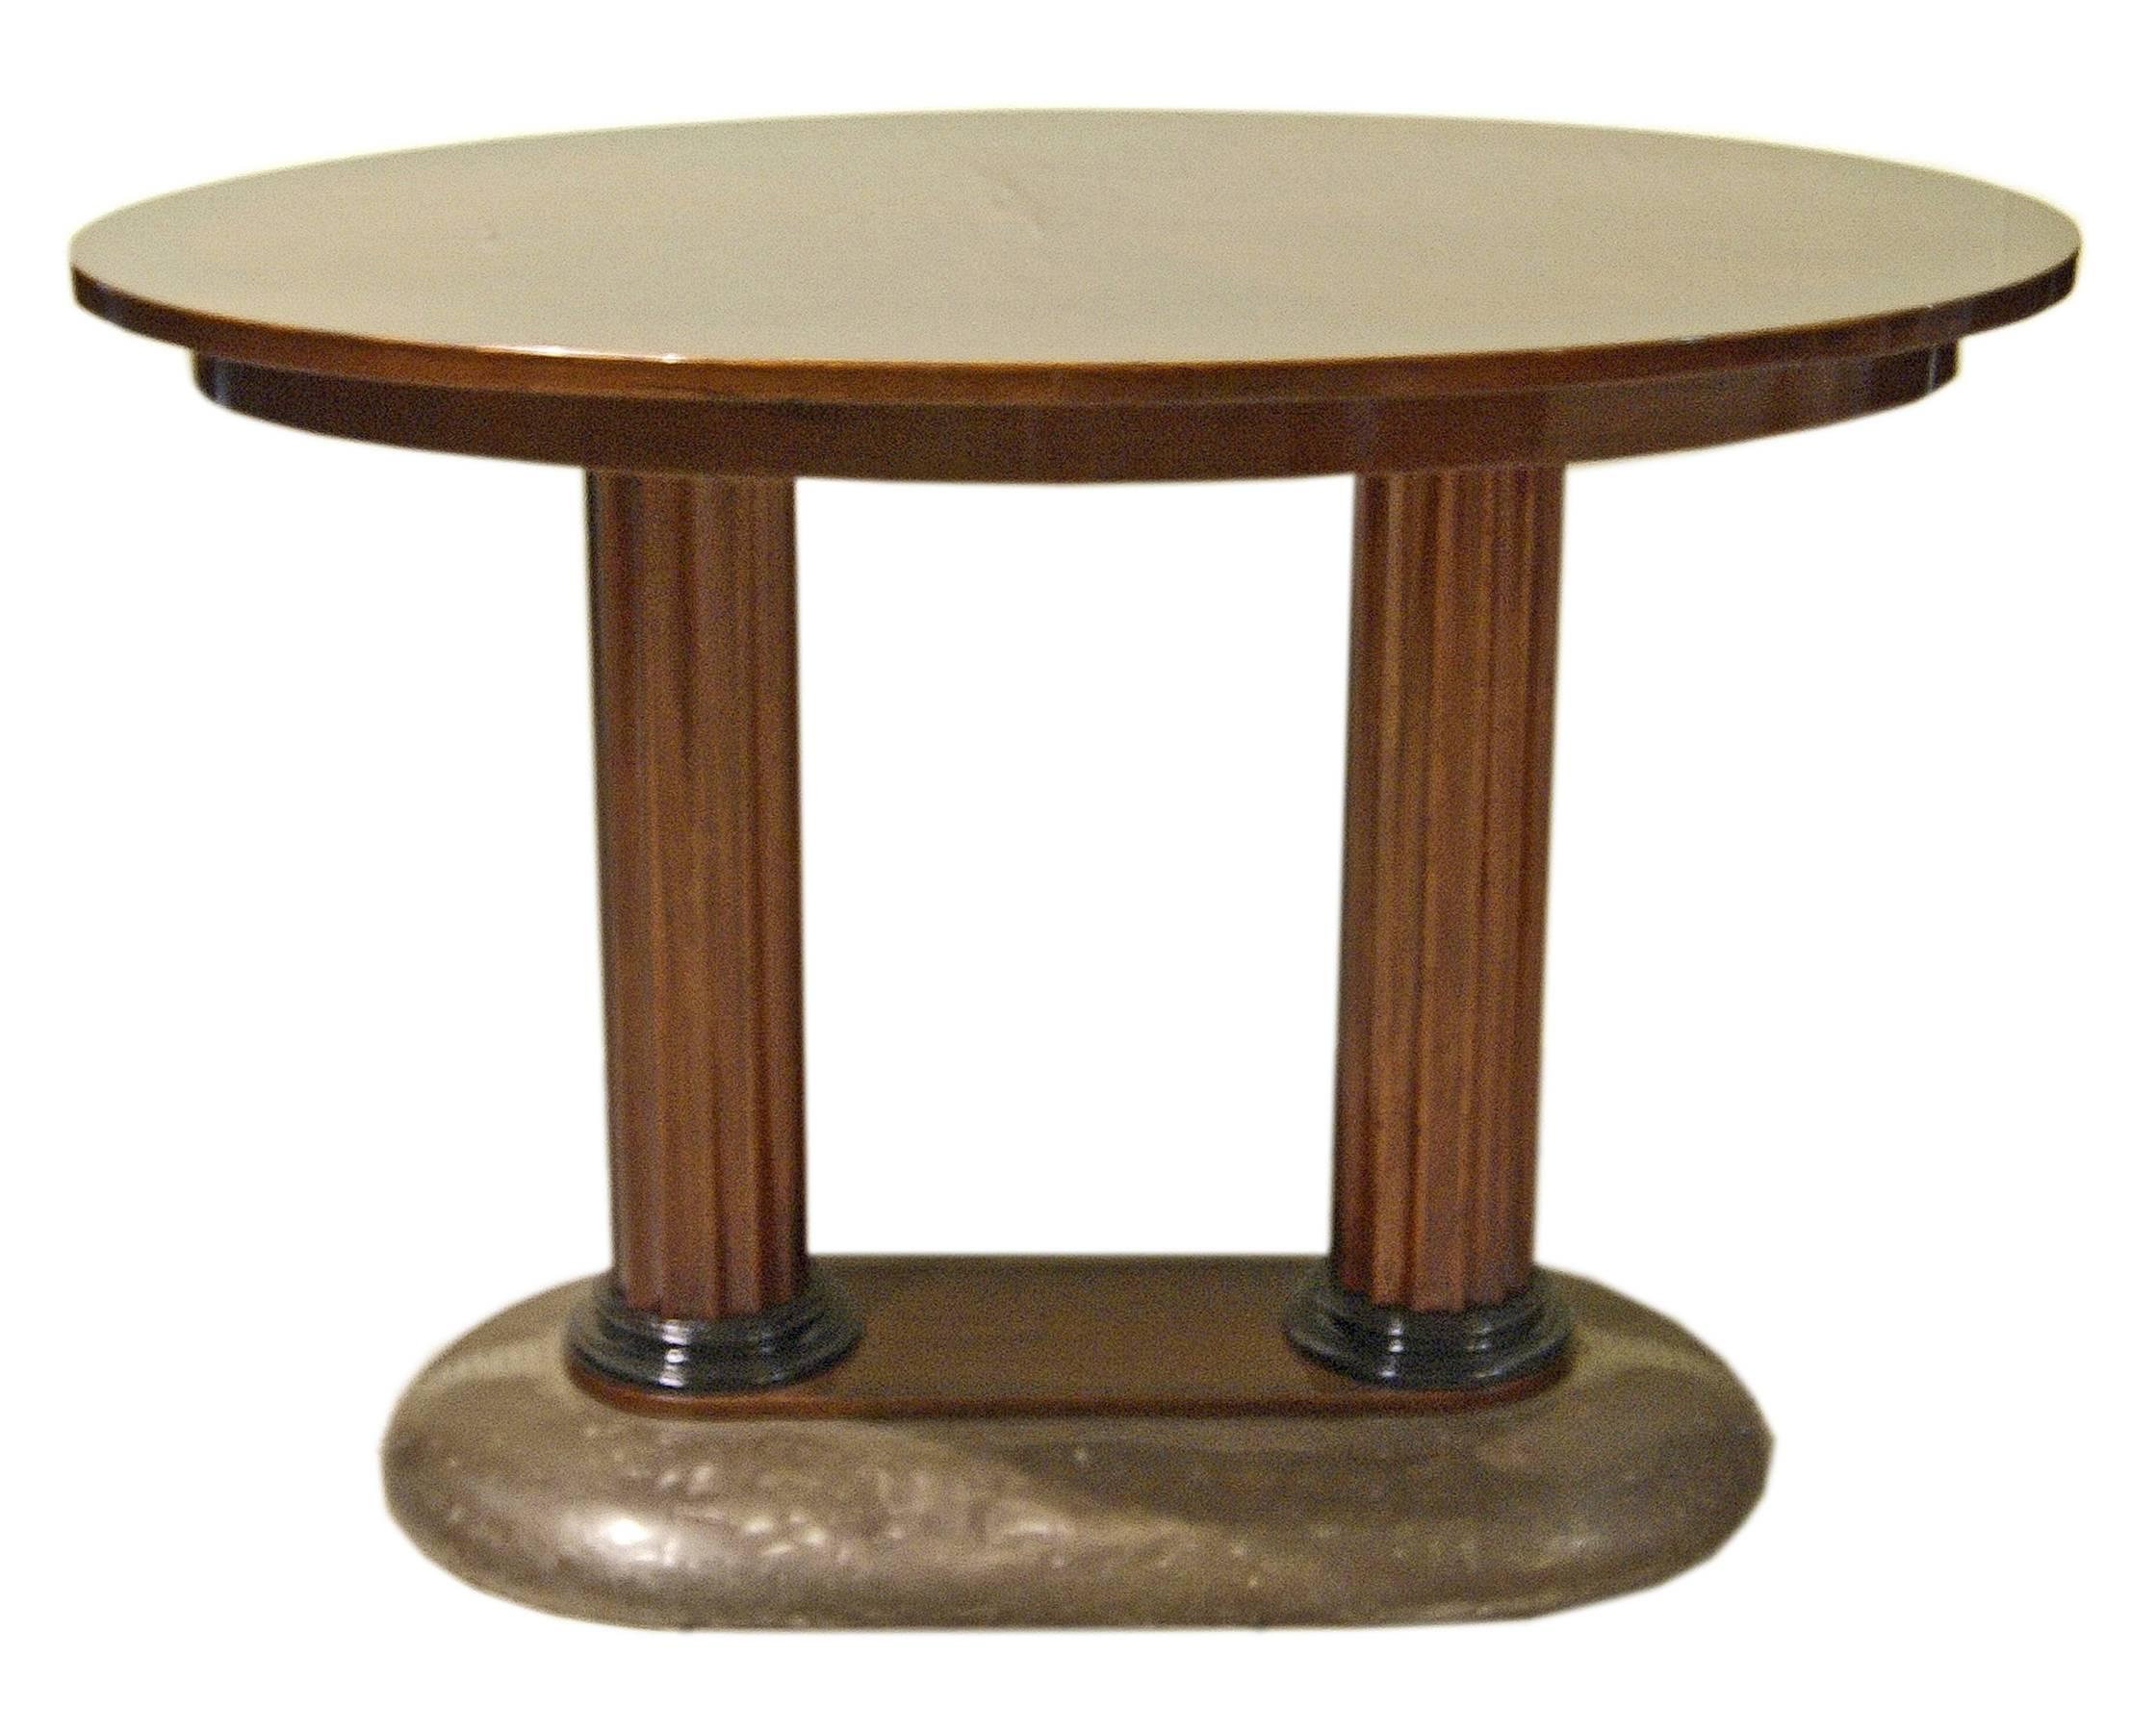 Art Nouveau table, made of mahogany wood: Mahogany massive and veneer (table's plate) / high quality handwork.
It is of most elegant appearance: The oval table's plate is attached to fluted pair of columns which is based on oblong support covered